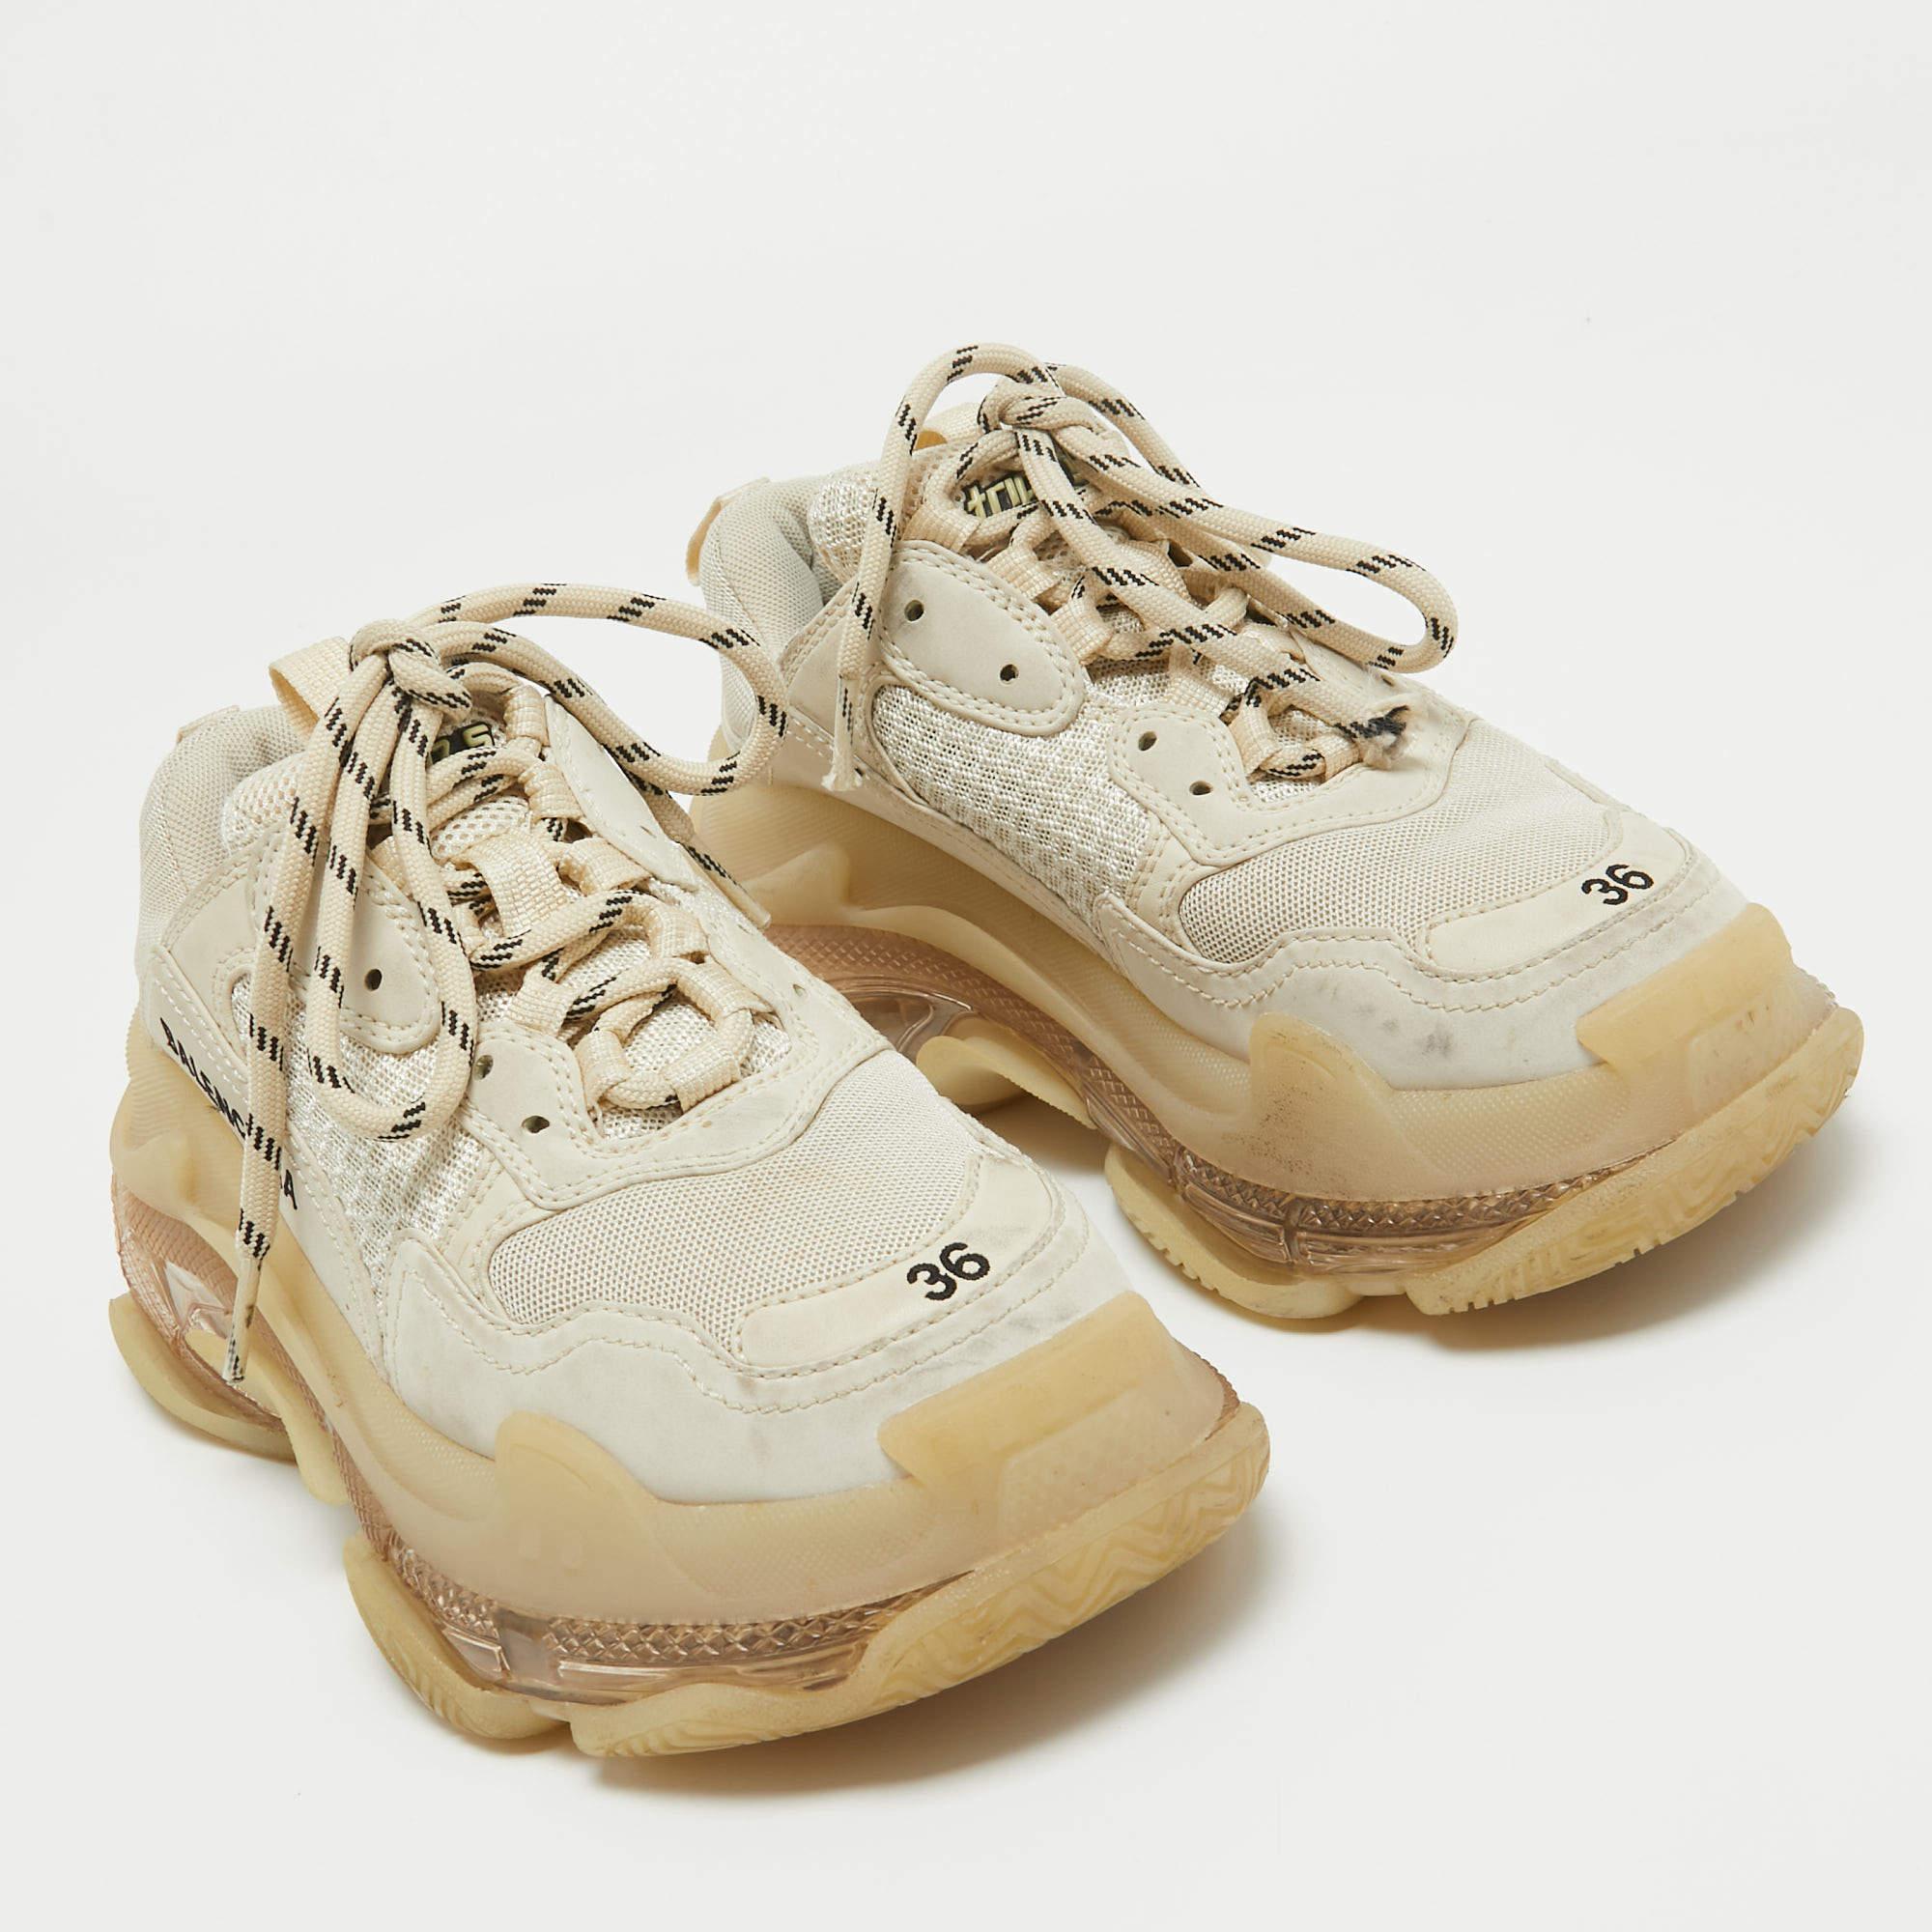 Balenciaga Cream Mesh and Faux Leather Triple S Clear Sole Sneakers Size 36 3